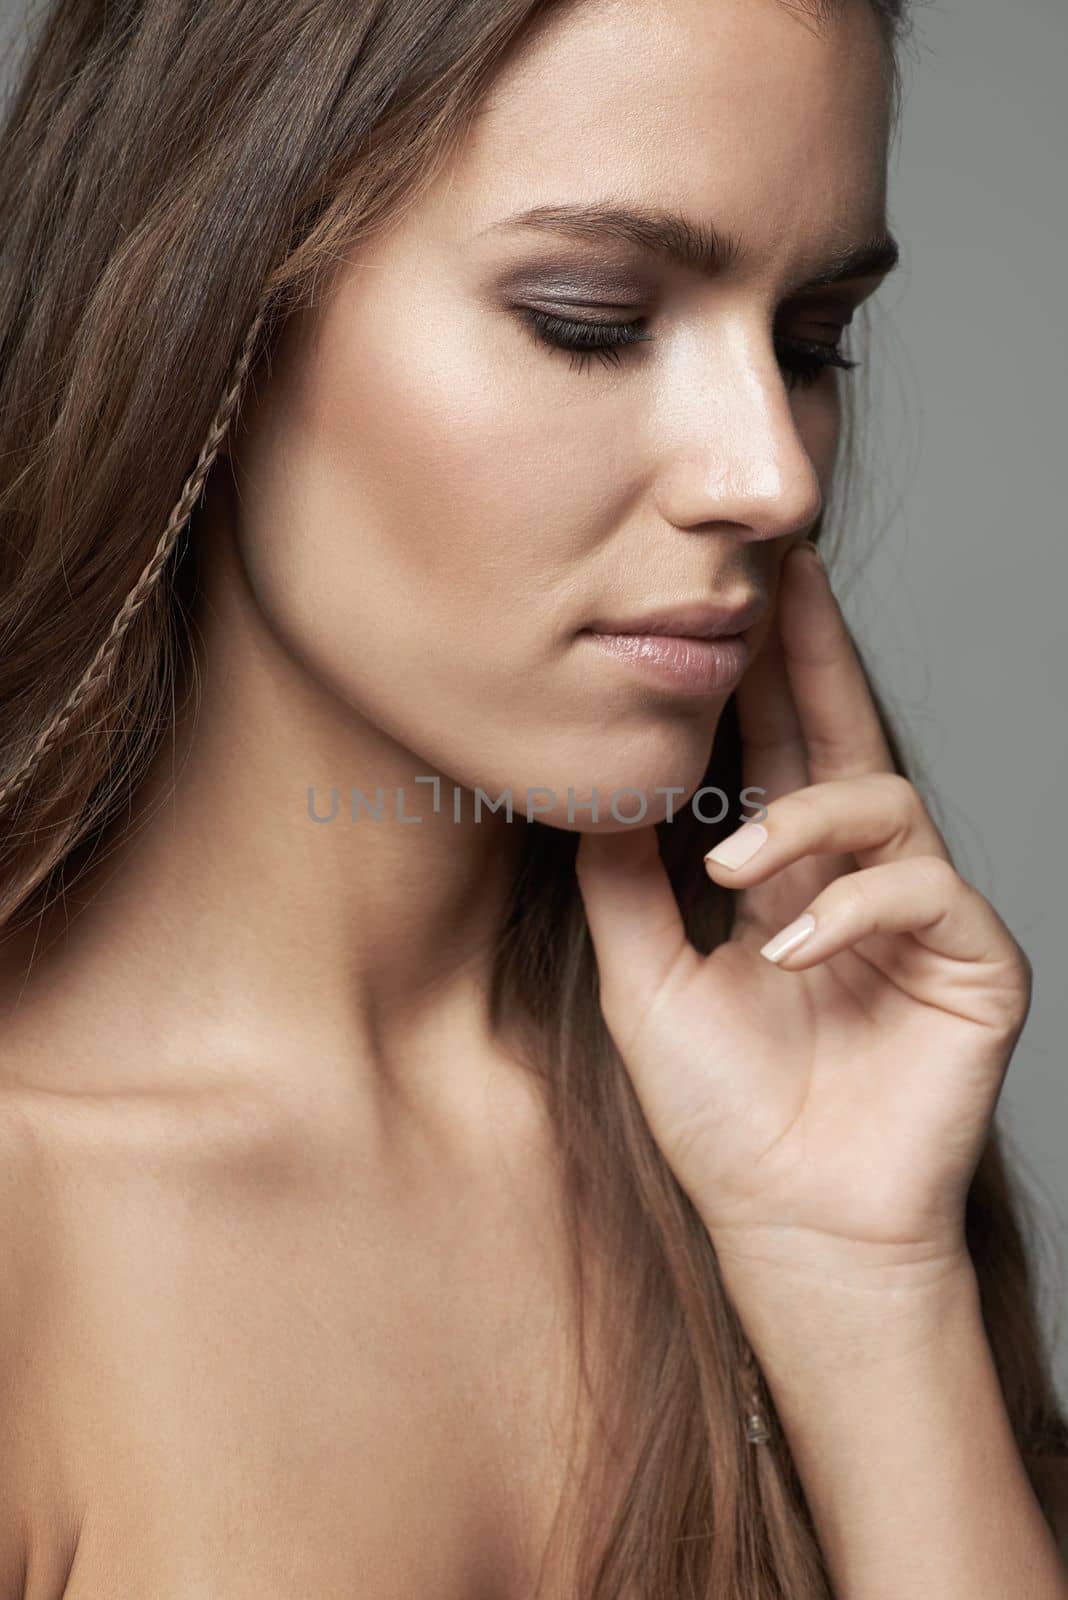 Beauty in simplicity. a beautiful young woman against a gray background